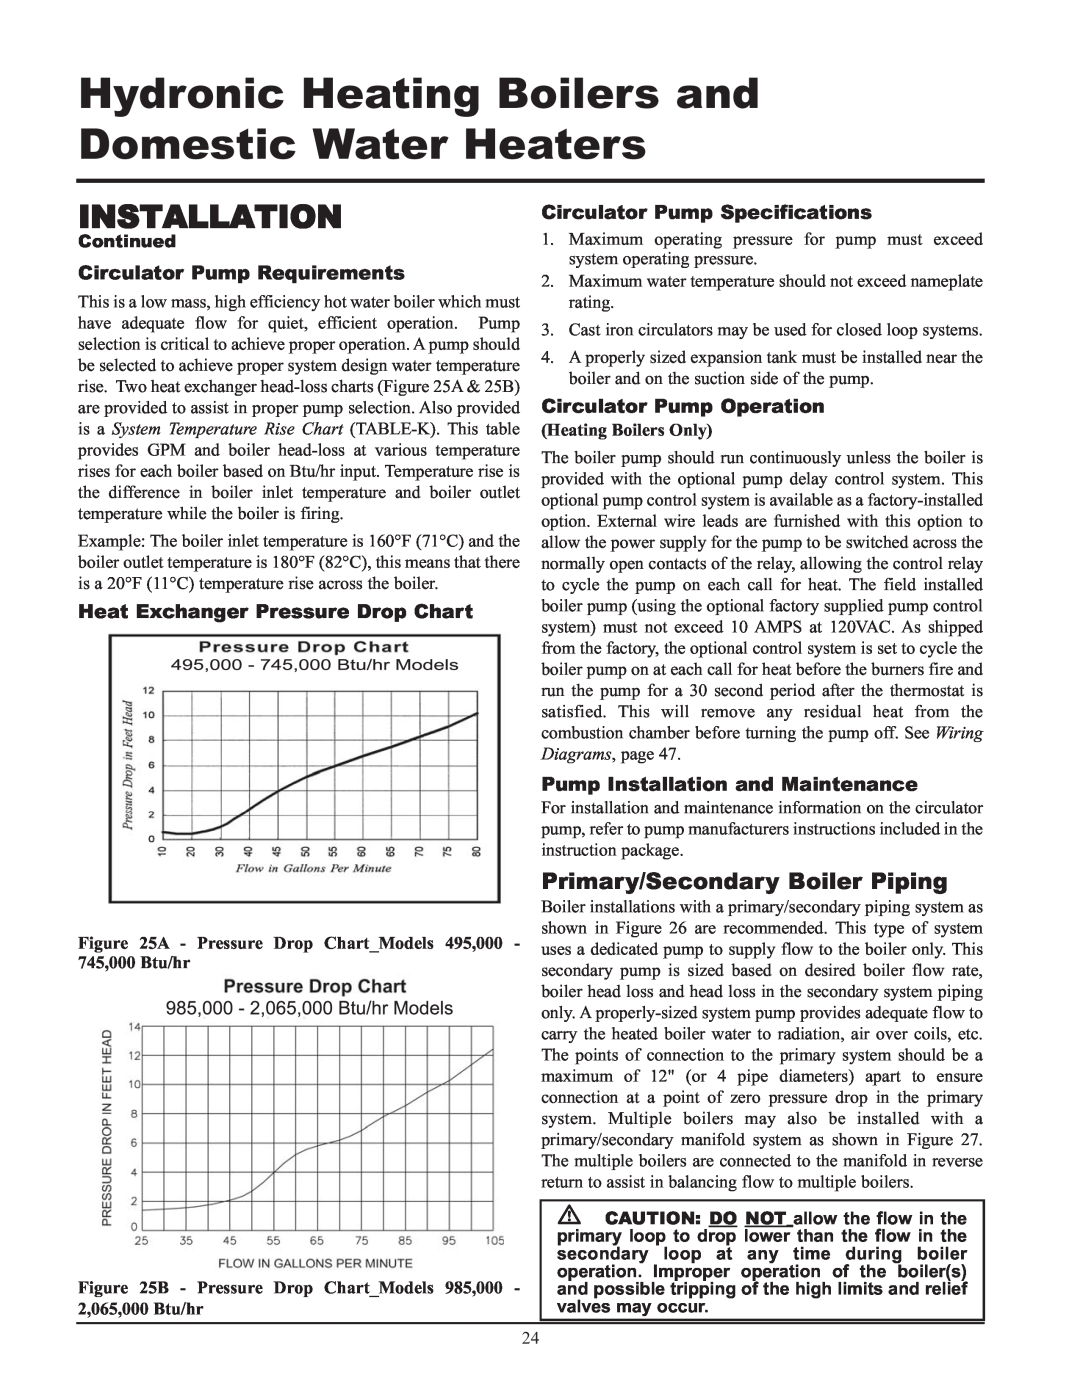 Lochinvar 495, 065 Primary/Secondary Boiler Piping, Circulator Pump Requirements, Heat Exchanger Pressure Drop Chart 